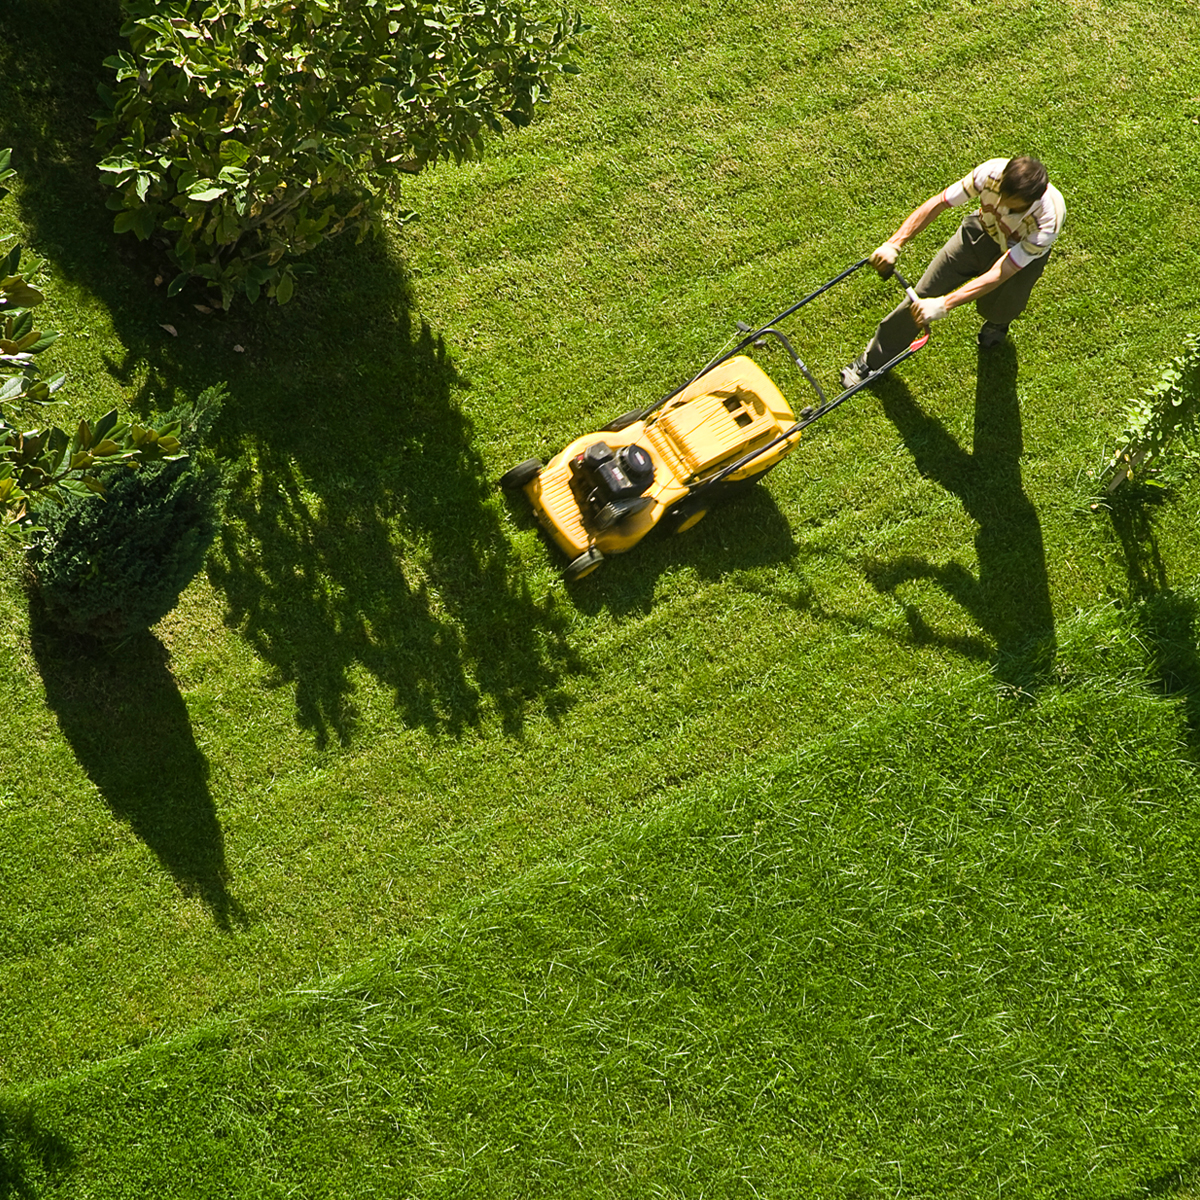 One of the top lawn maintenance tips is to make sure you don't mow your lawn too short.